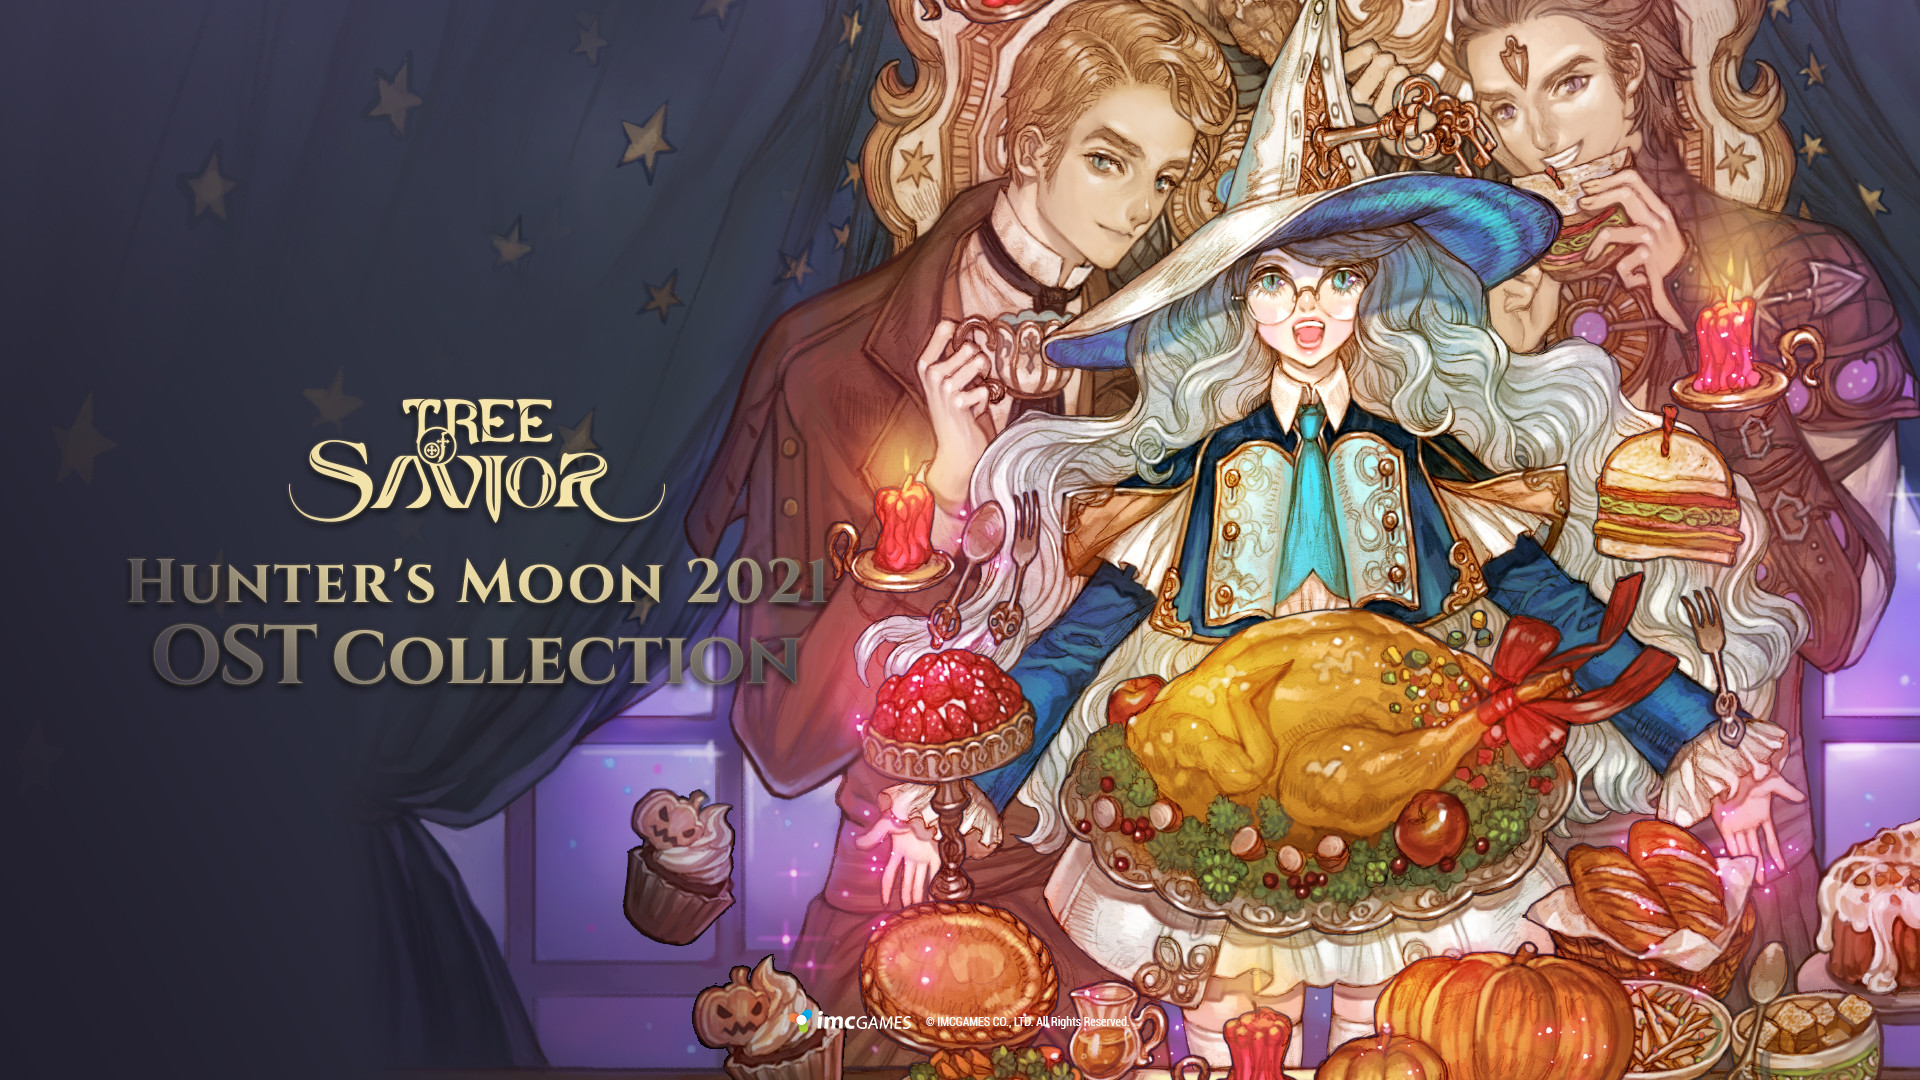 Tree of Savior - Hunter's Moon 2021 OST Collection Featured Screenshot #1